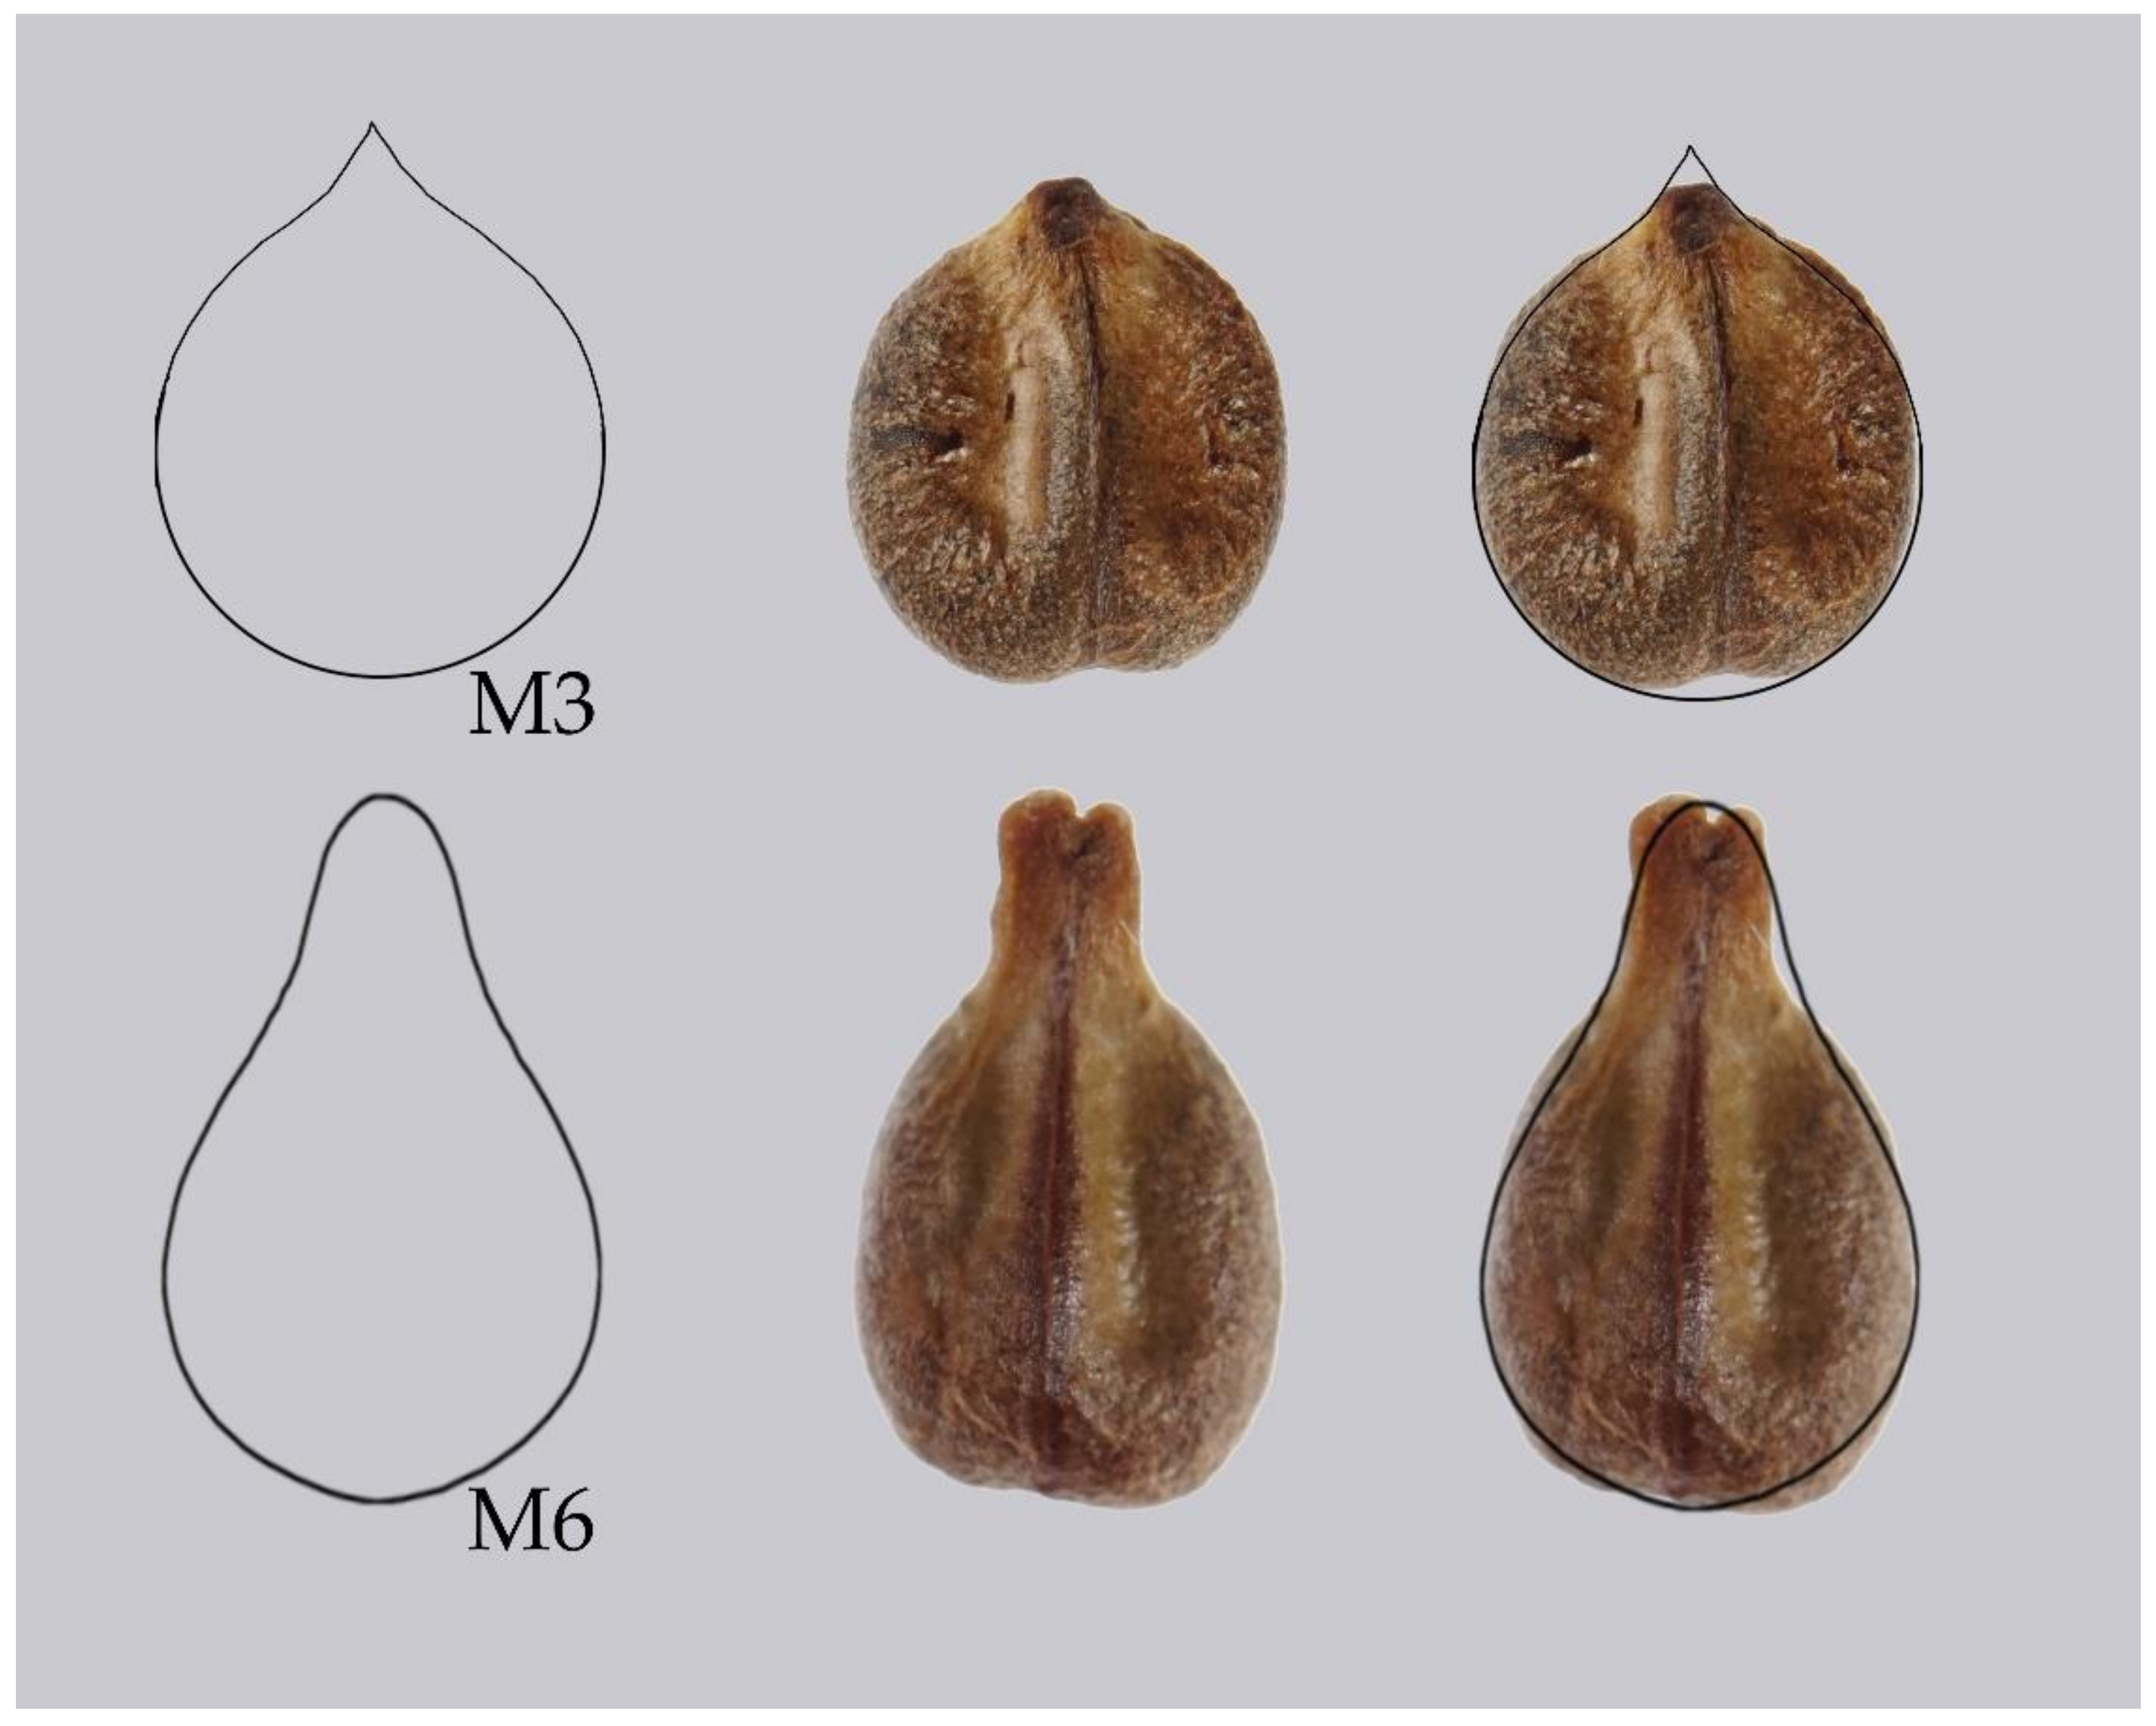 Agronomy Free Full Text Seed Morphology In The Vitaceae Based On Geometric Models Html